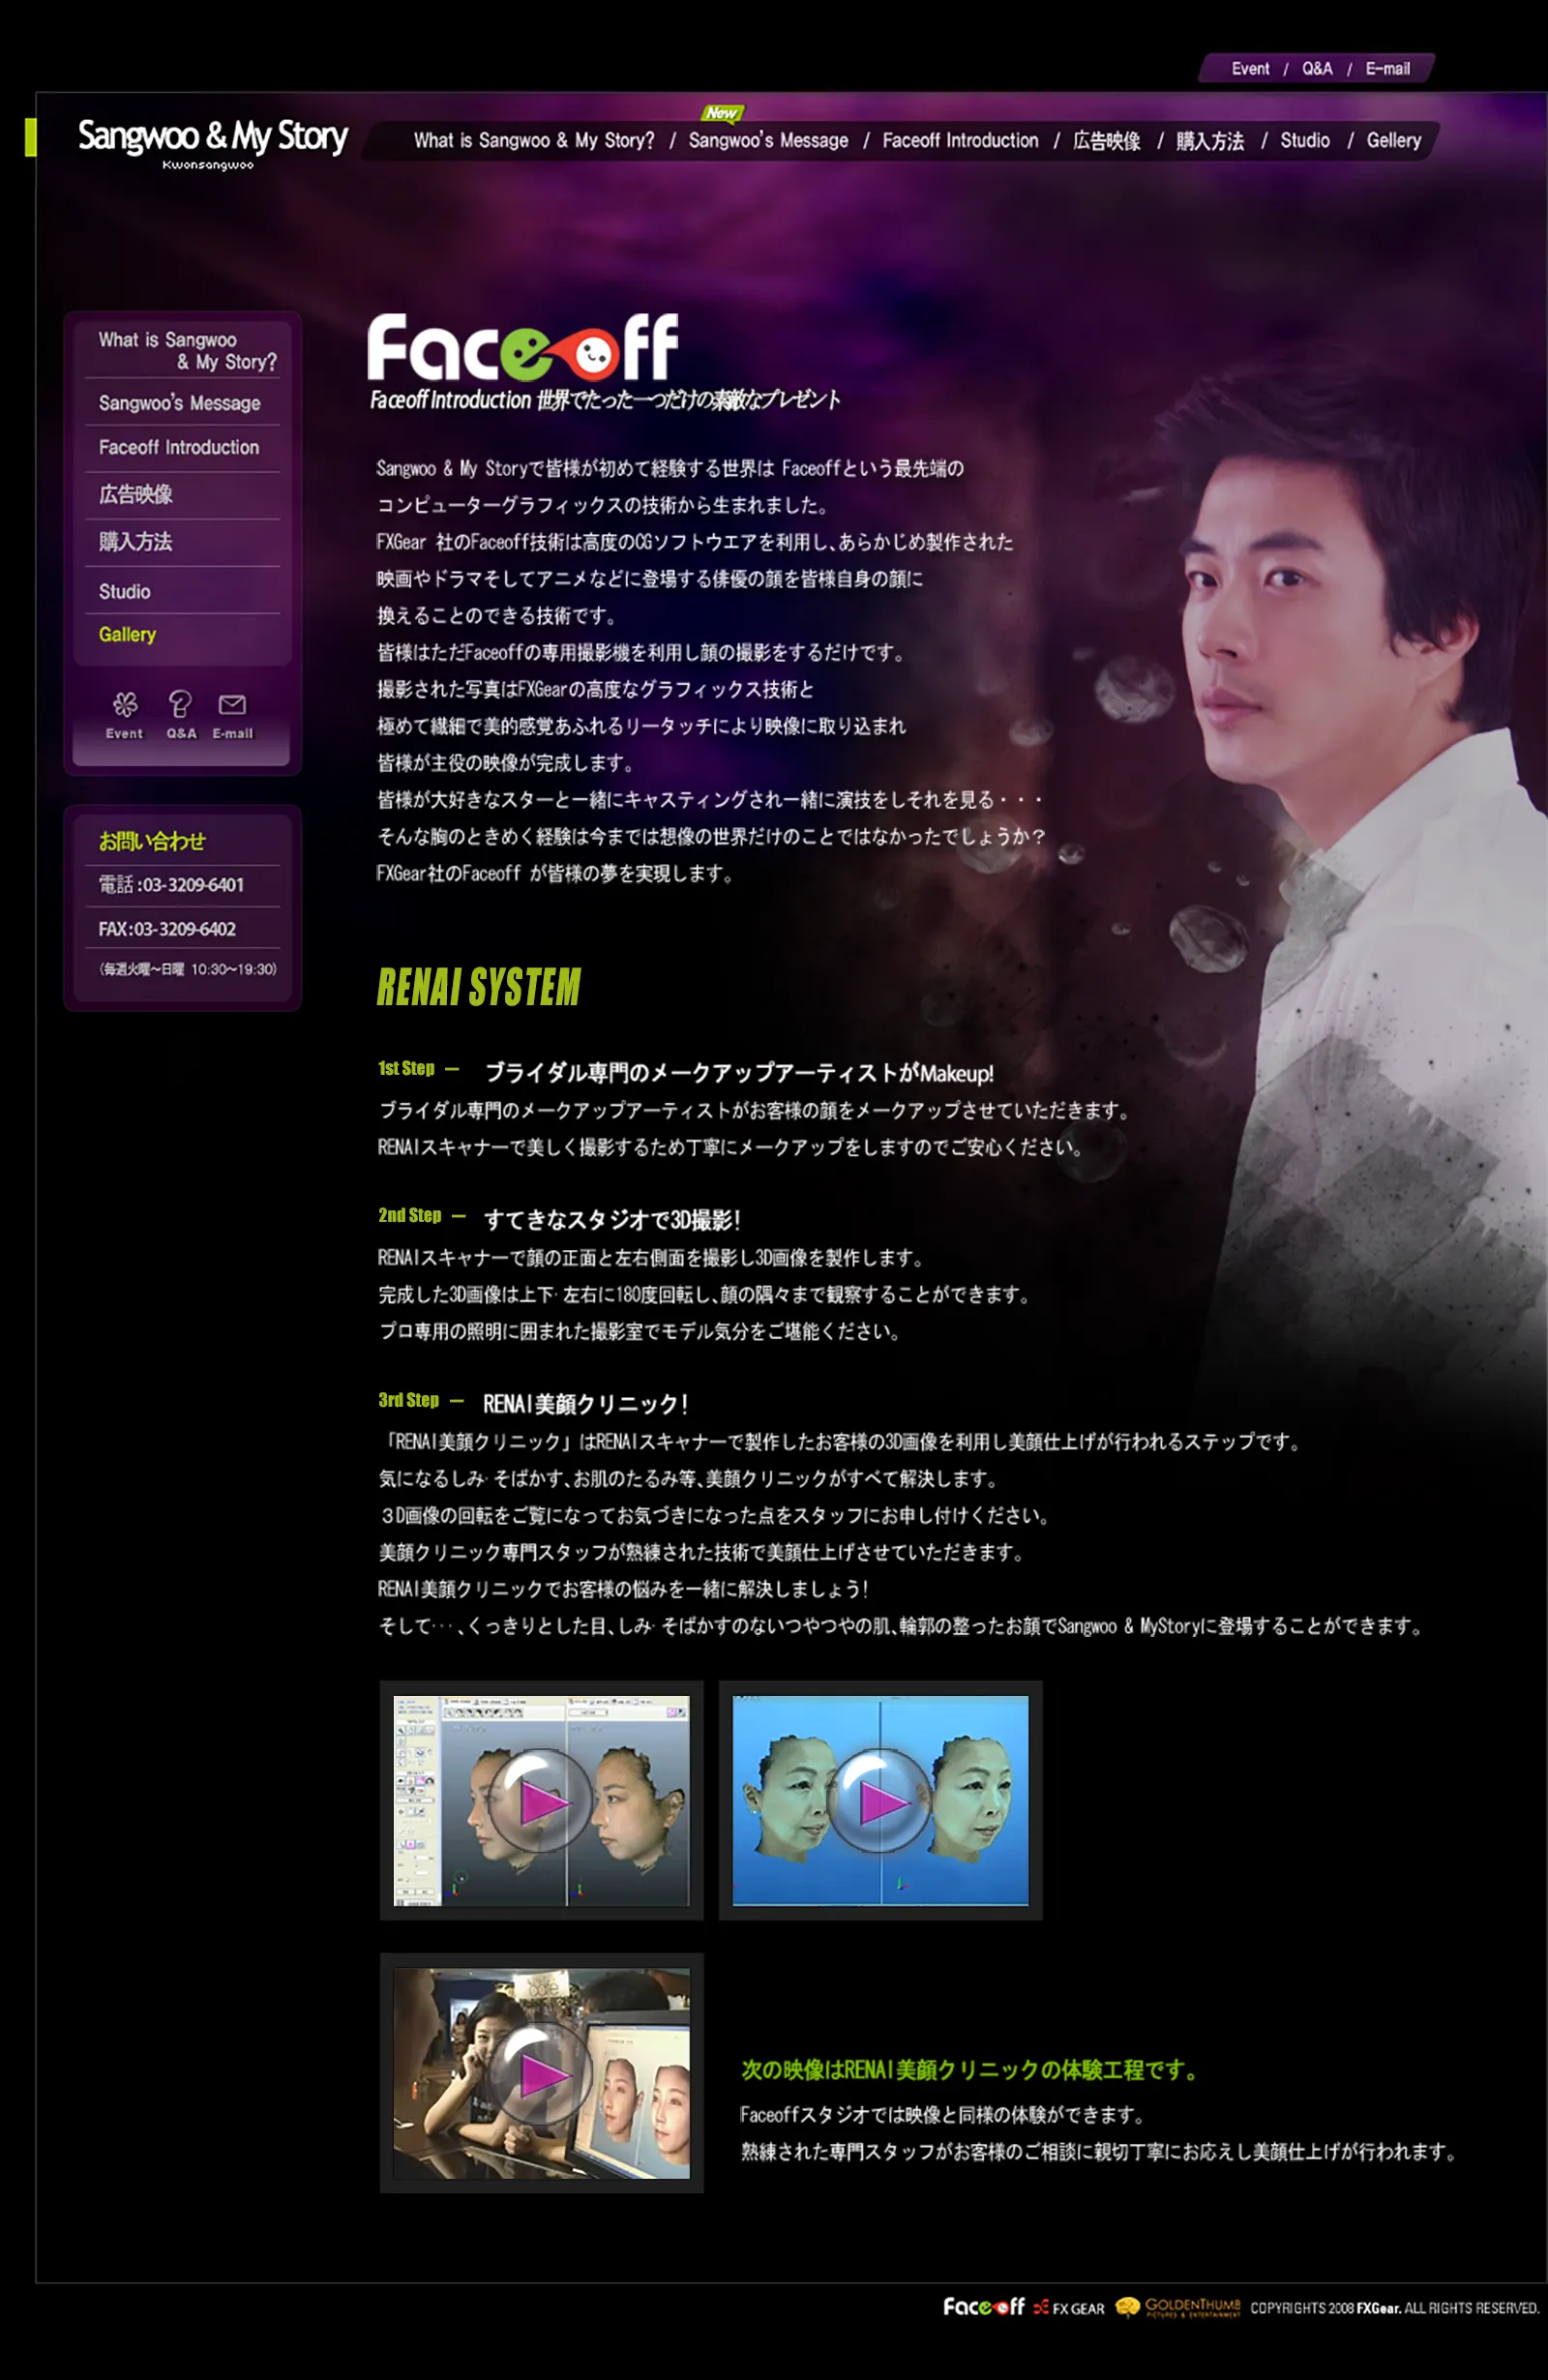 Sangwoo & My Story, Web Site Design Agency - ADDVALUN with MUSEION